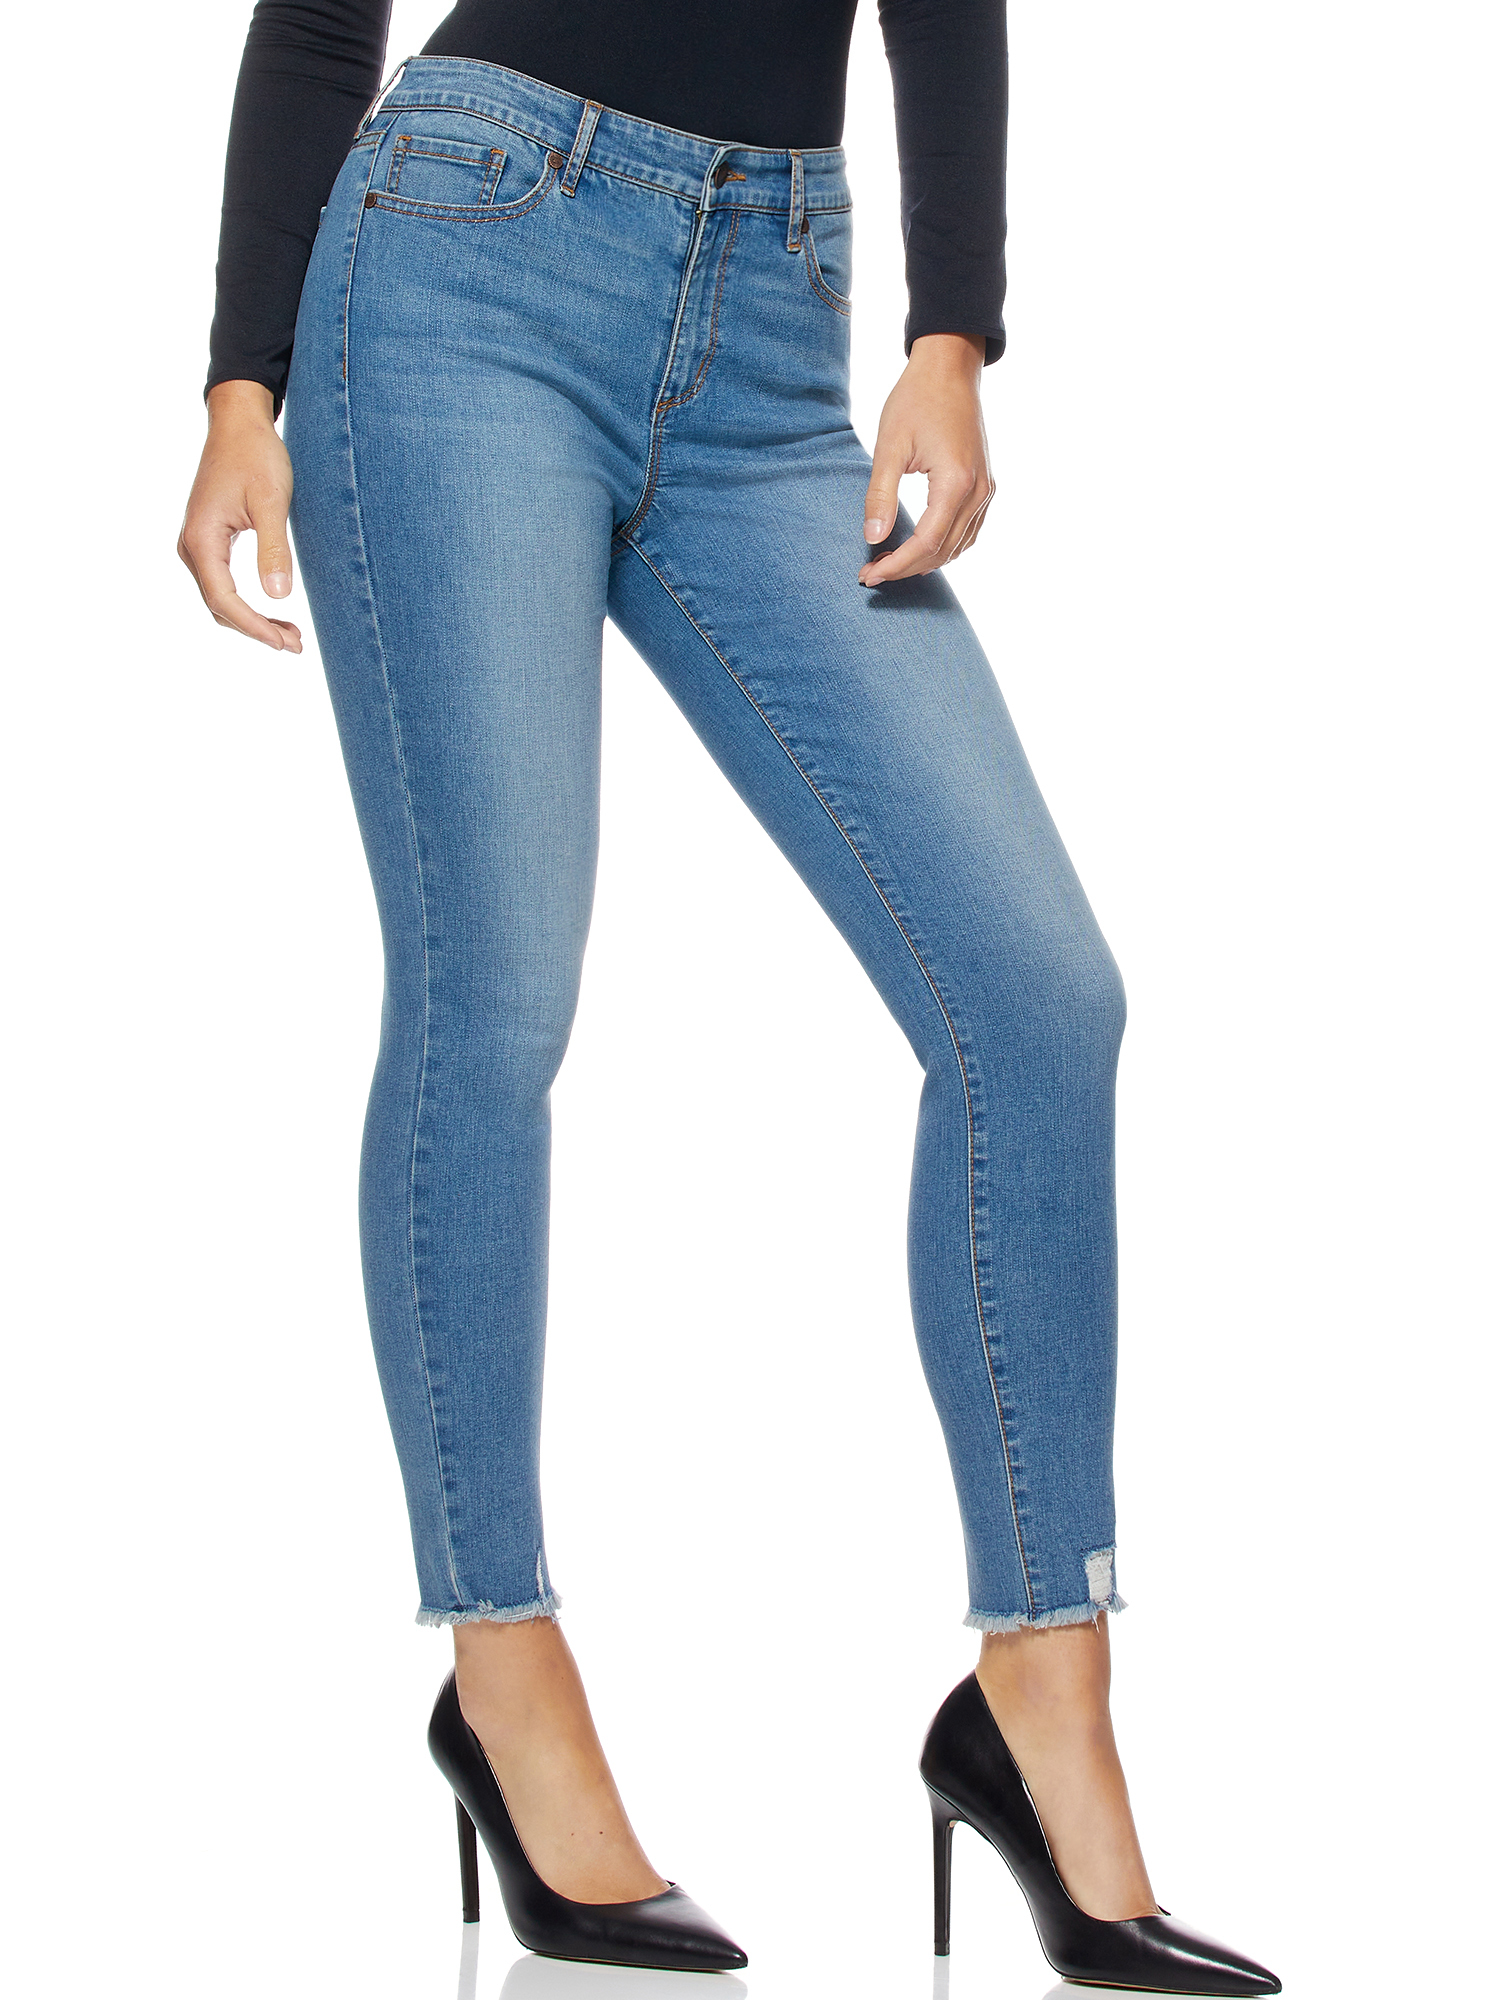 Sofia Jeans Women's Rosa Curvy High Rise Destructed Skinny Ankle Jeans - image 3 of 7